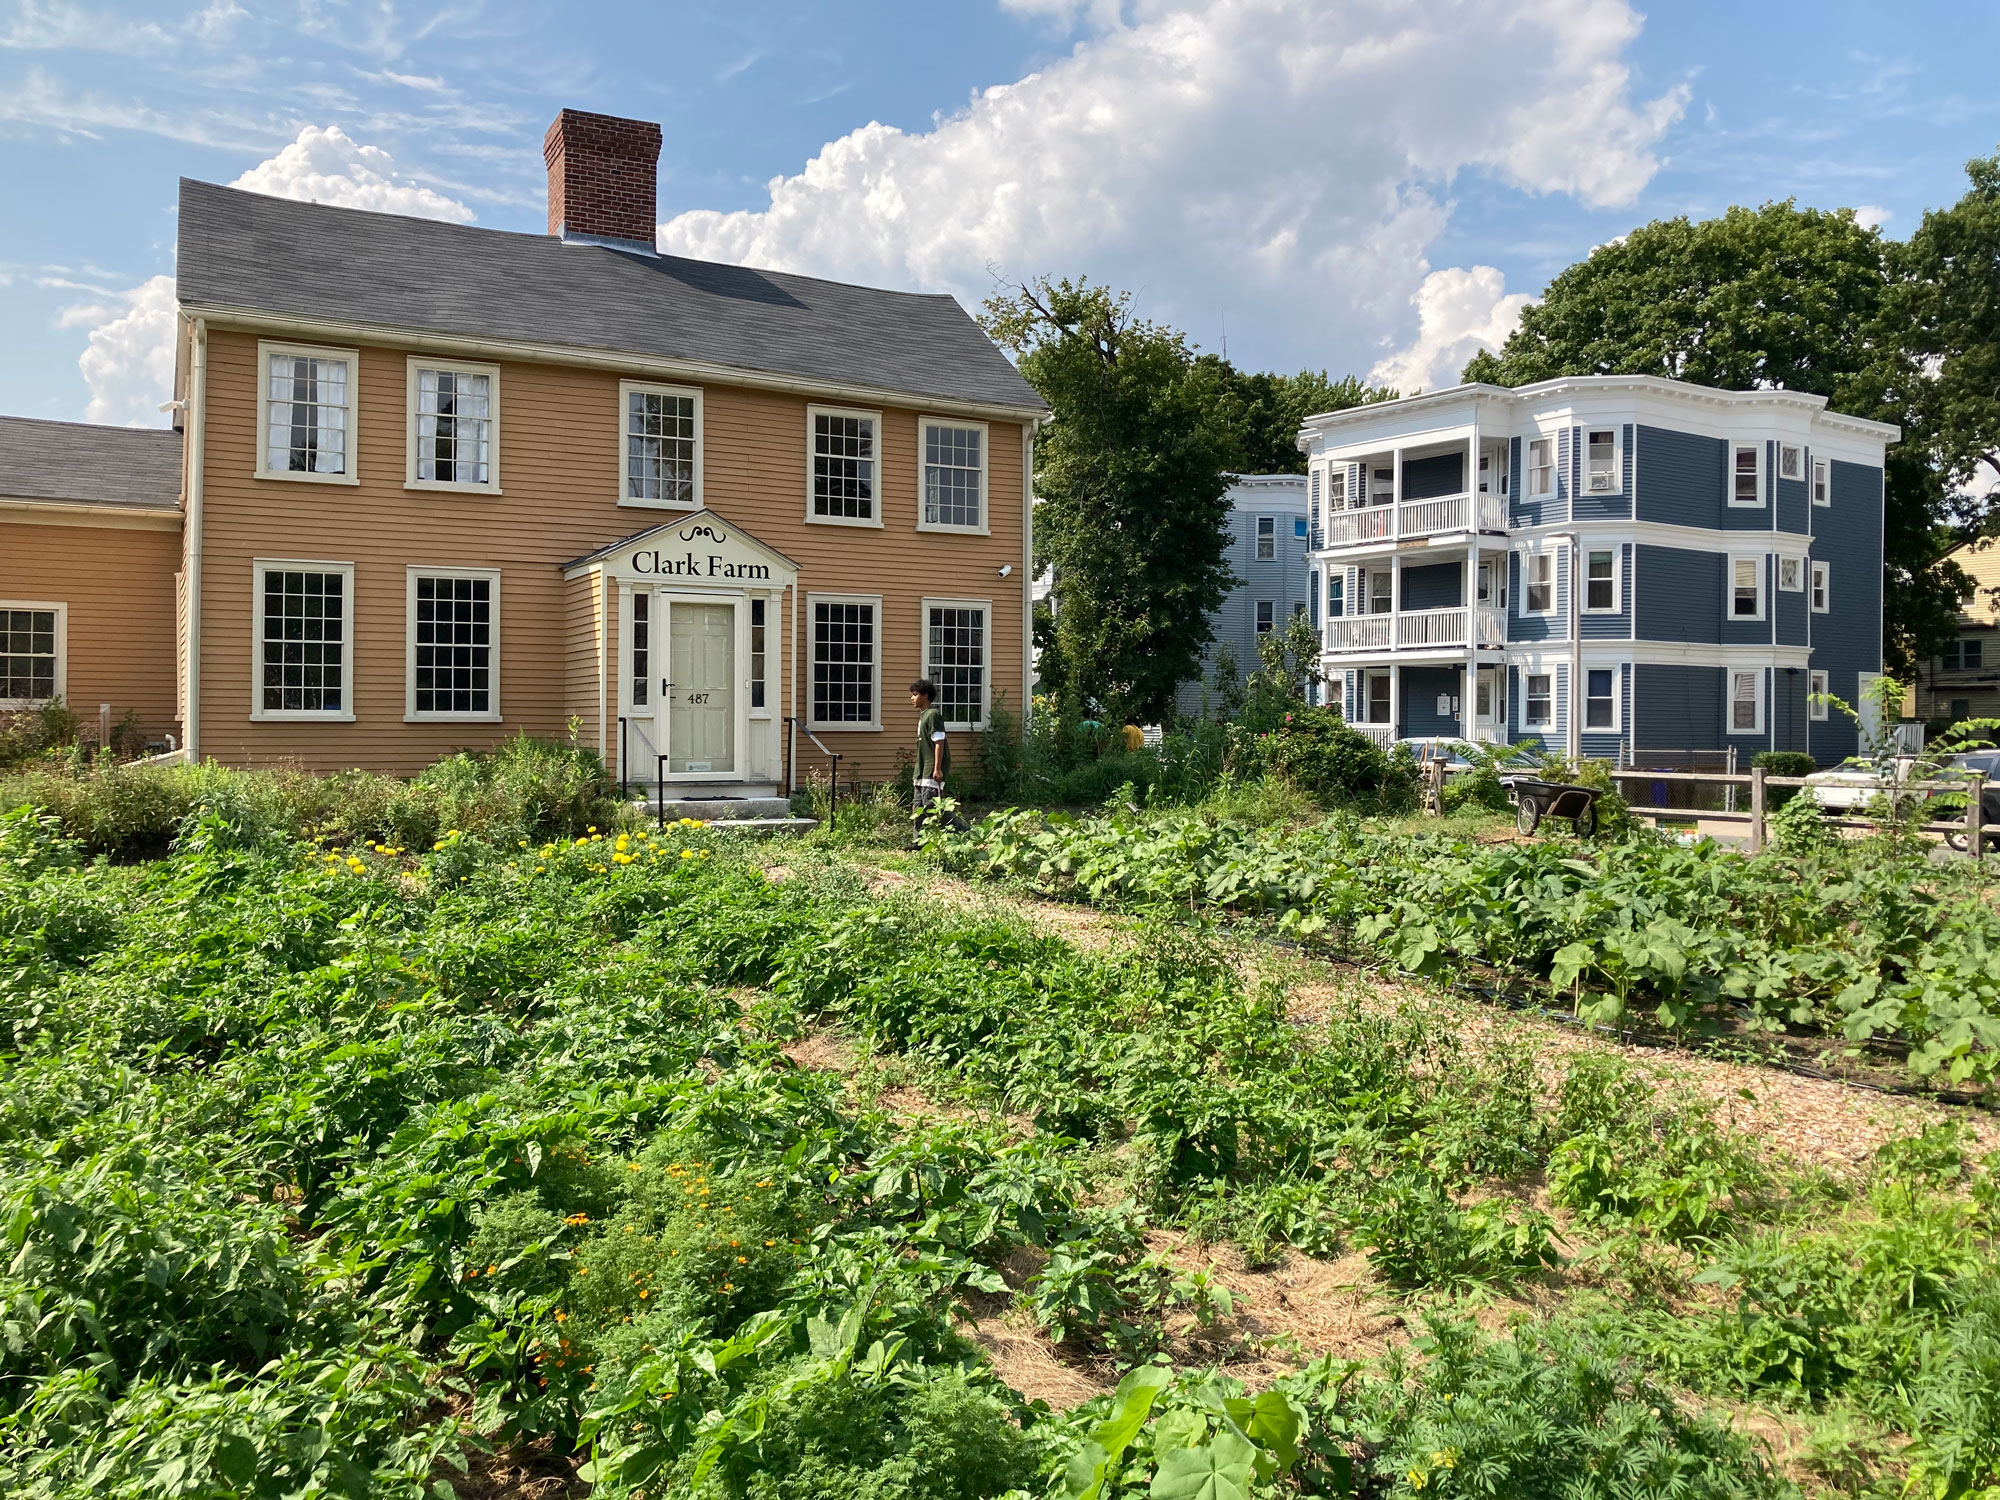 Urban Agriculture Grant Brings Together Diverse Urban Farms in Boston